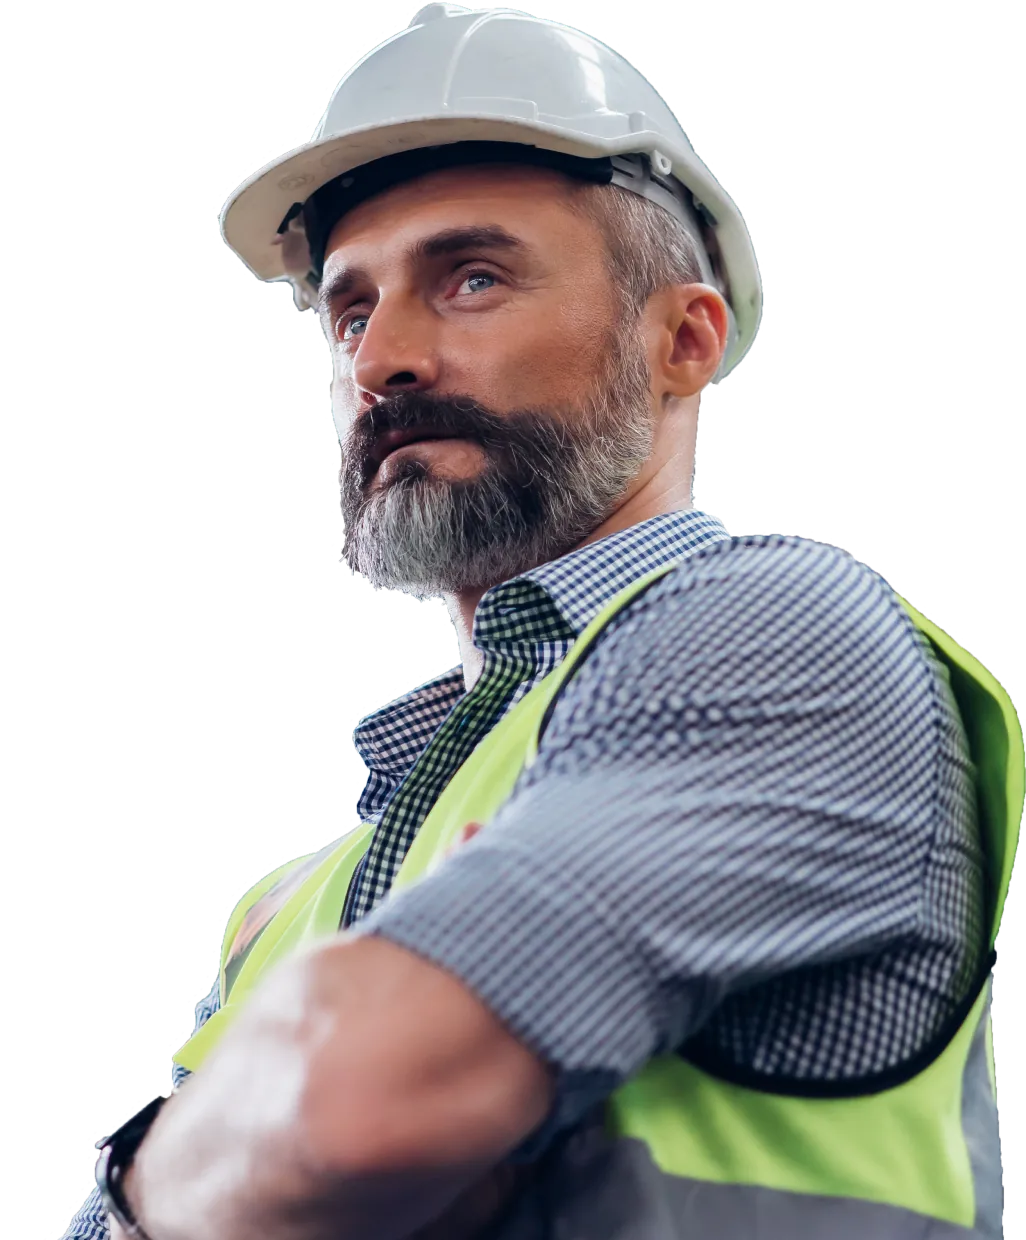 Man in a white hard hat stands with his arms crossed and looks off into the distance.